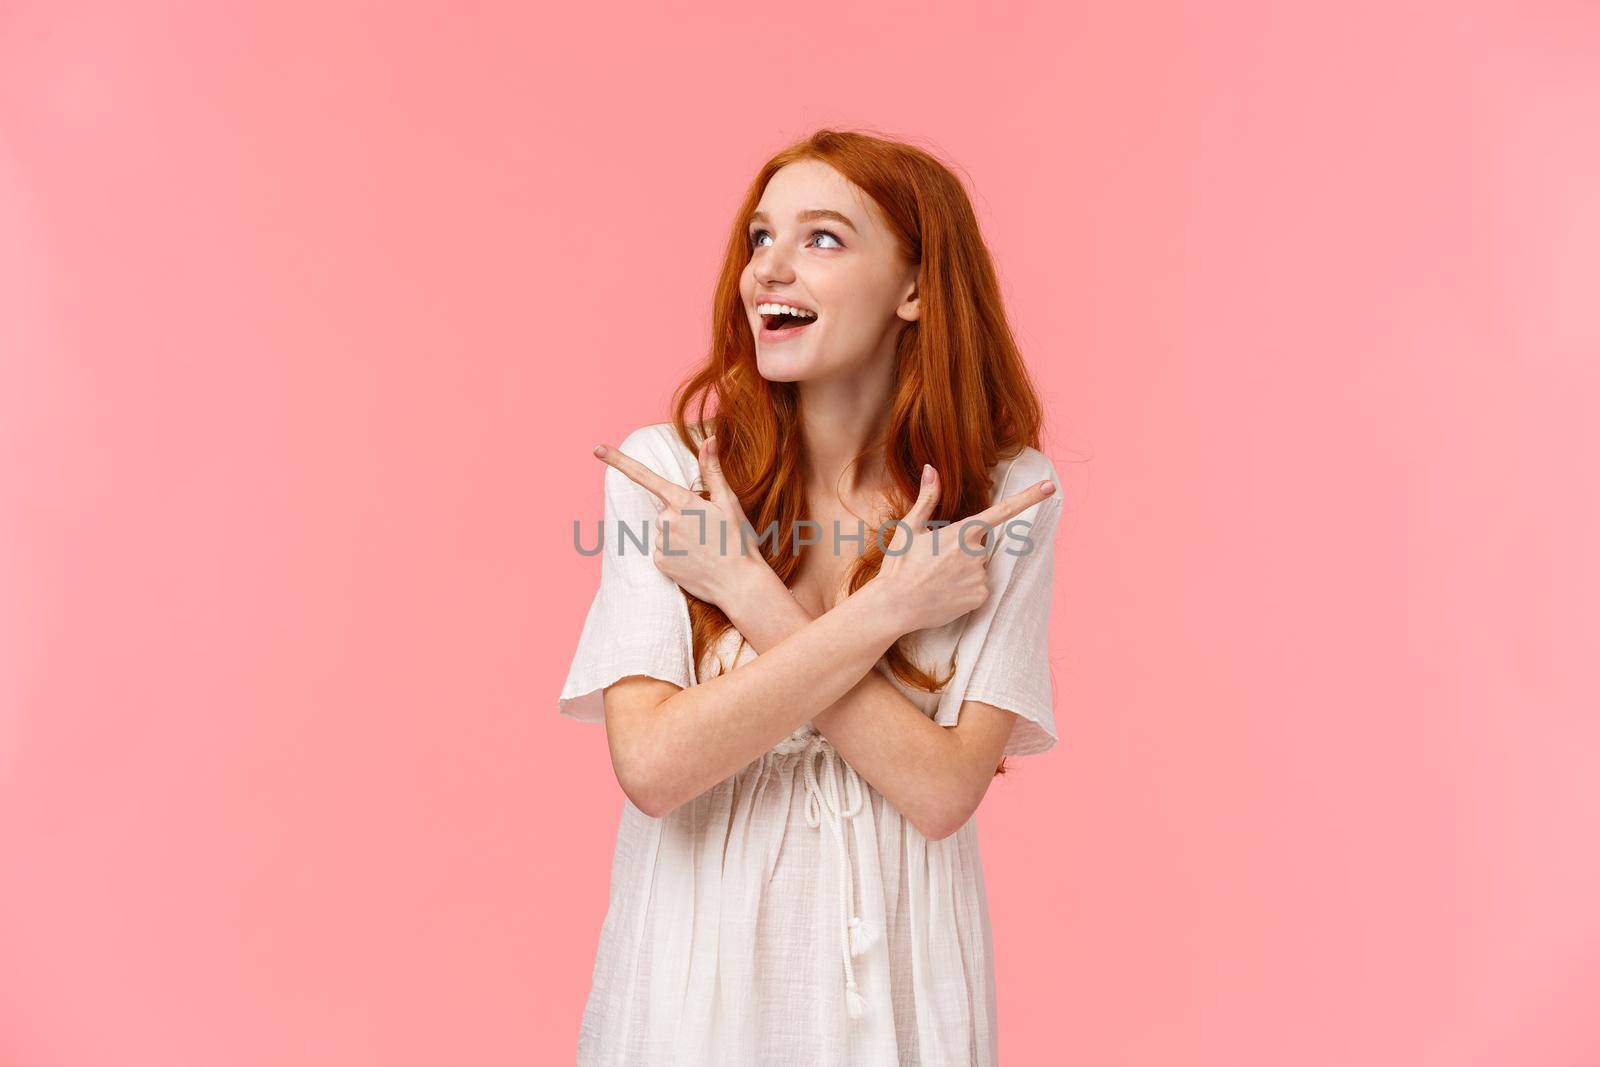 Dreamy attractive redhead female, looking around wondered and amused with happy smile, glance left as pointing sideways, left and right products, making final choice what buy, pink background.